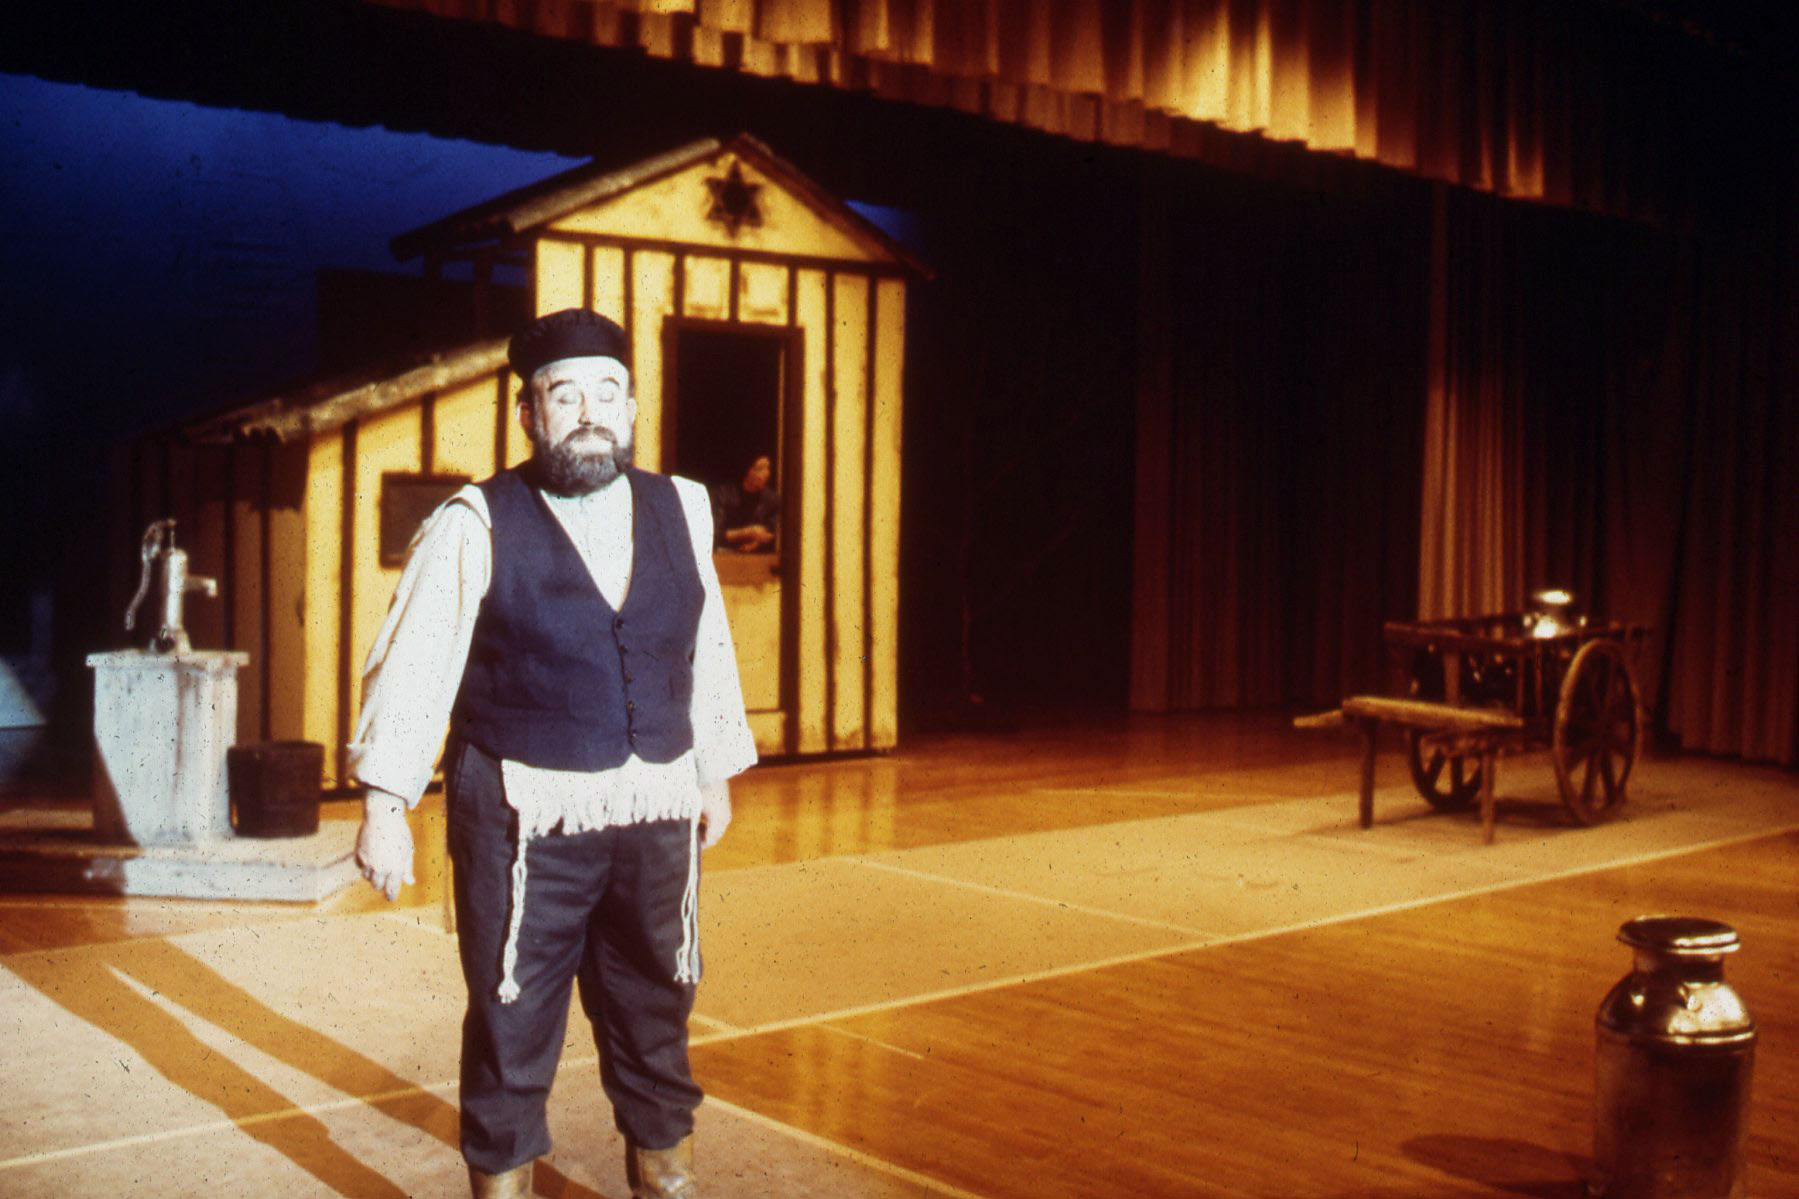 Dad as Tevye in the Fulton County Players production of Fiddler on the Roof.  Kodachrome slide.